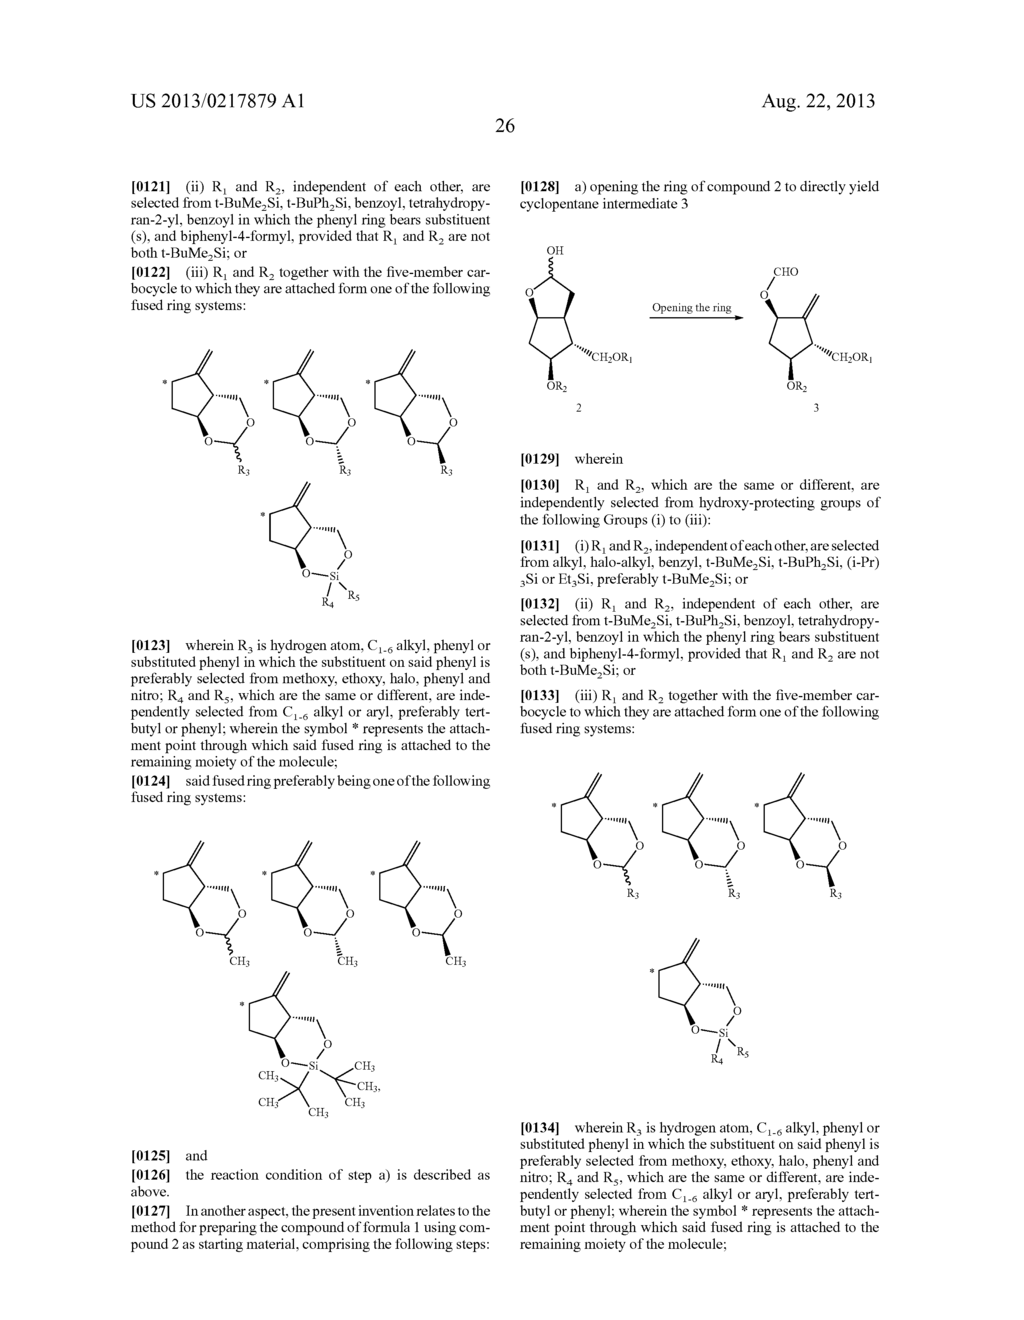 ENTECAVIR SYNTHESIS METHOD AND INTERMEDIATE COMPOUND THEREOF - diagram, schematic, and image 27